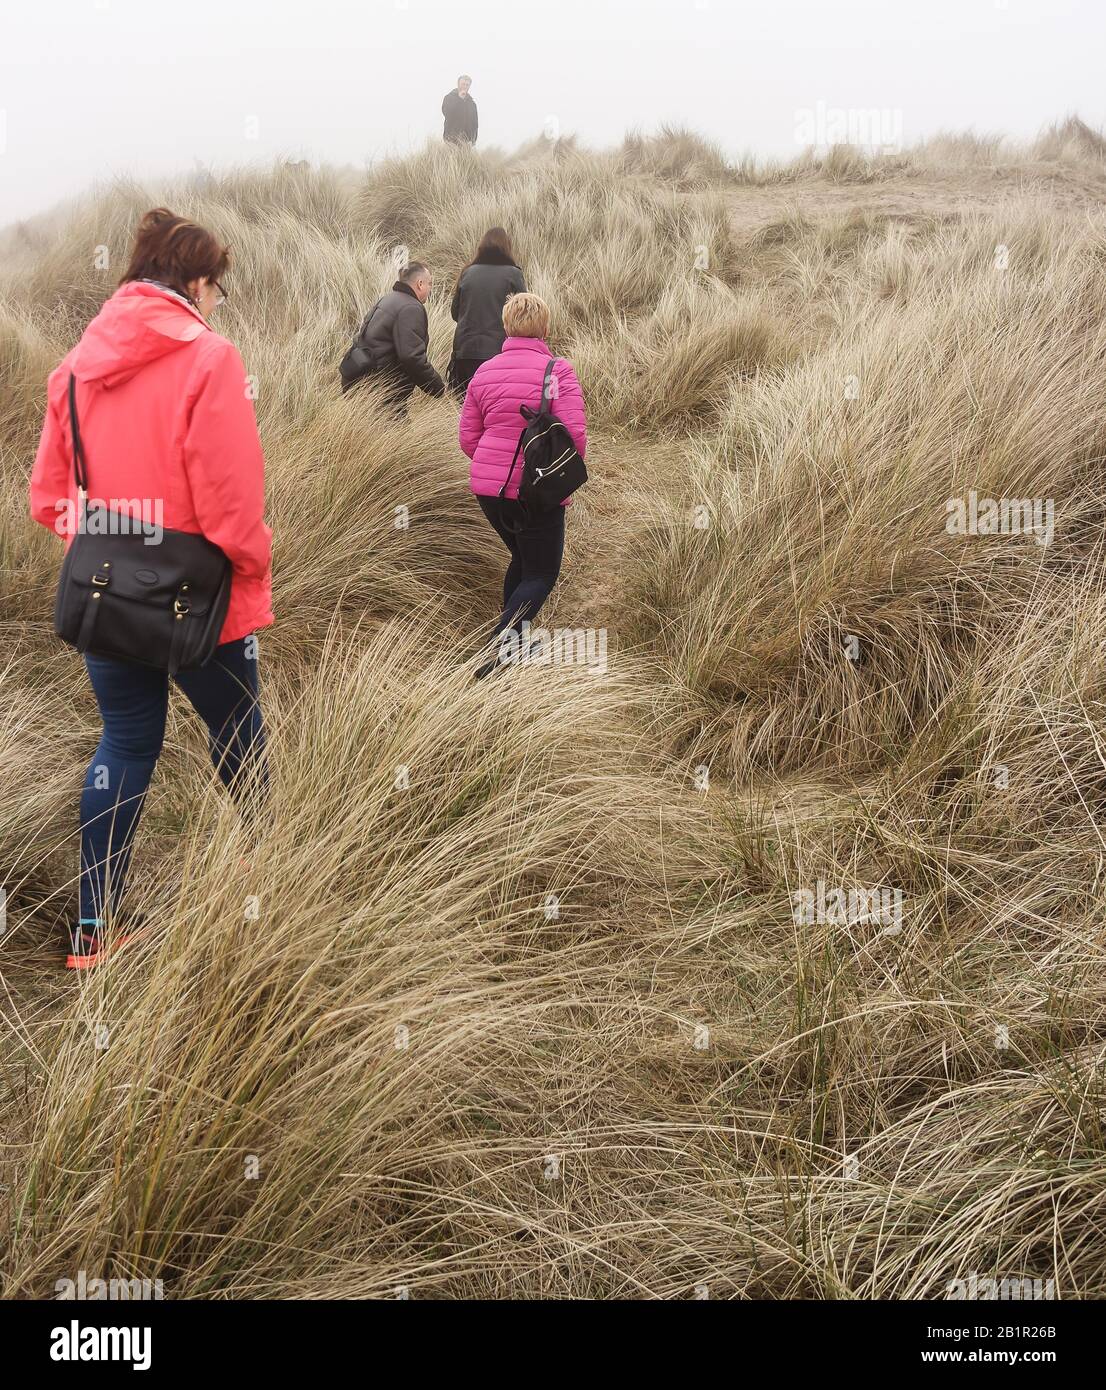 Horsey Gap, North Norfolk / England, UK: People exploring, wandering, climbing in fields in  foggy, misty day Stock Photo